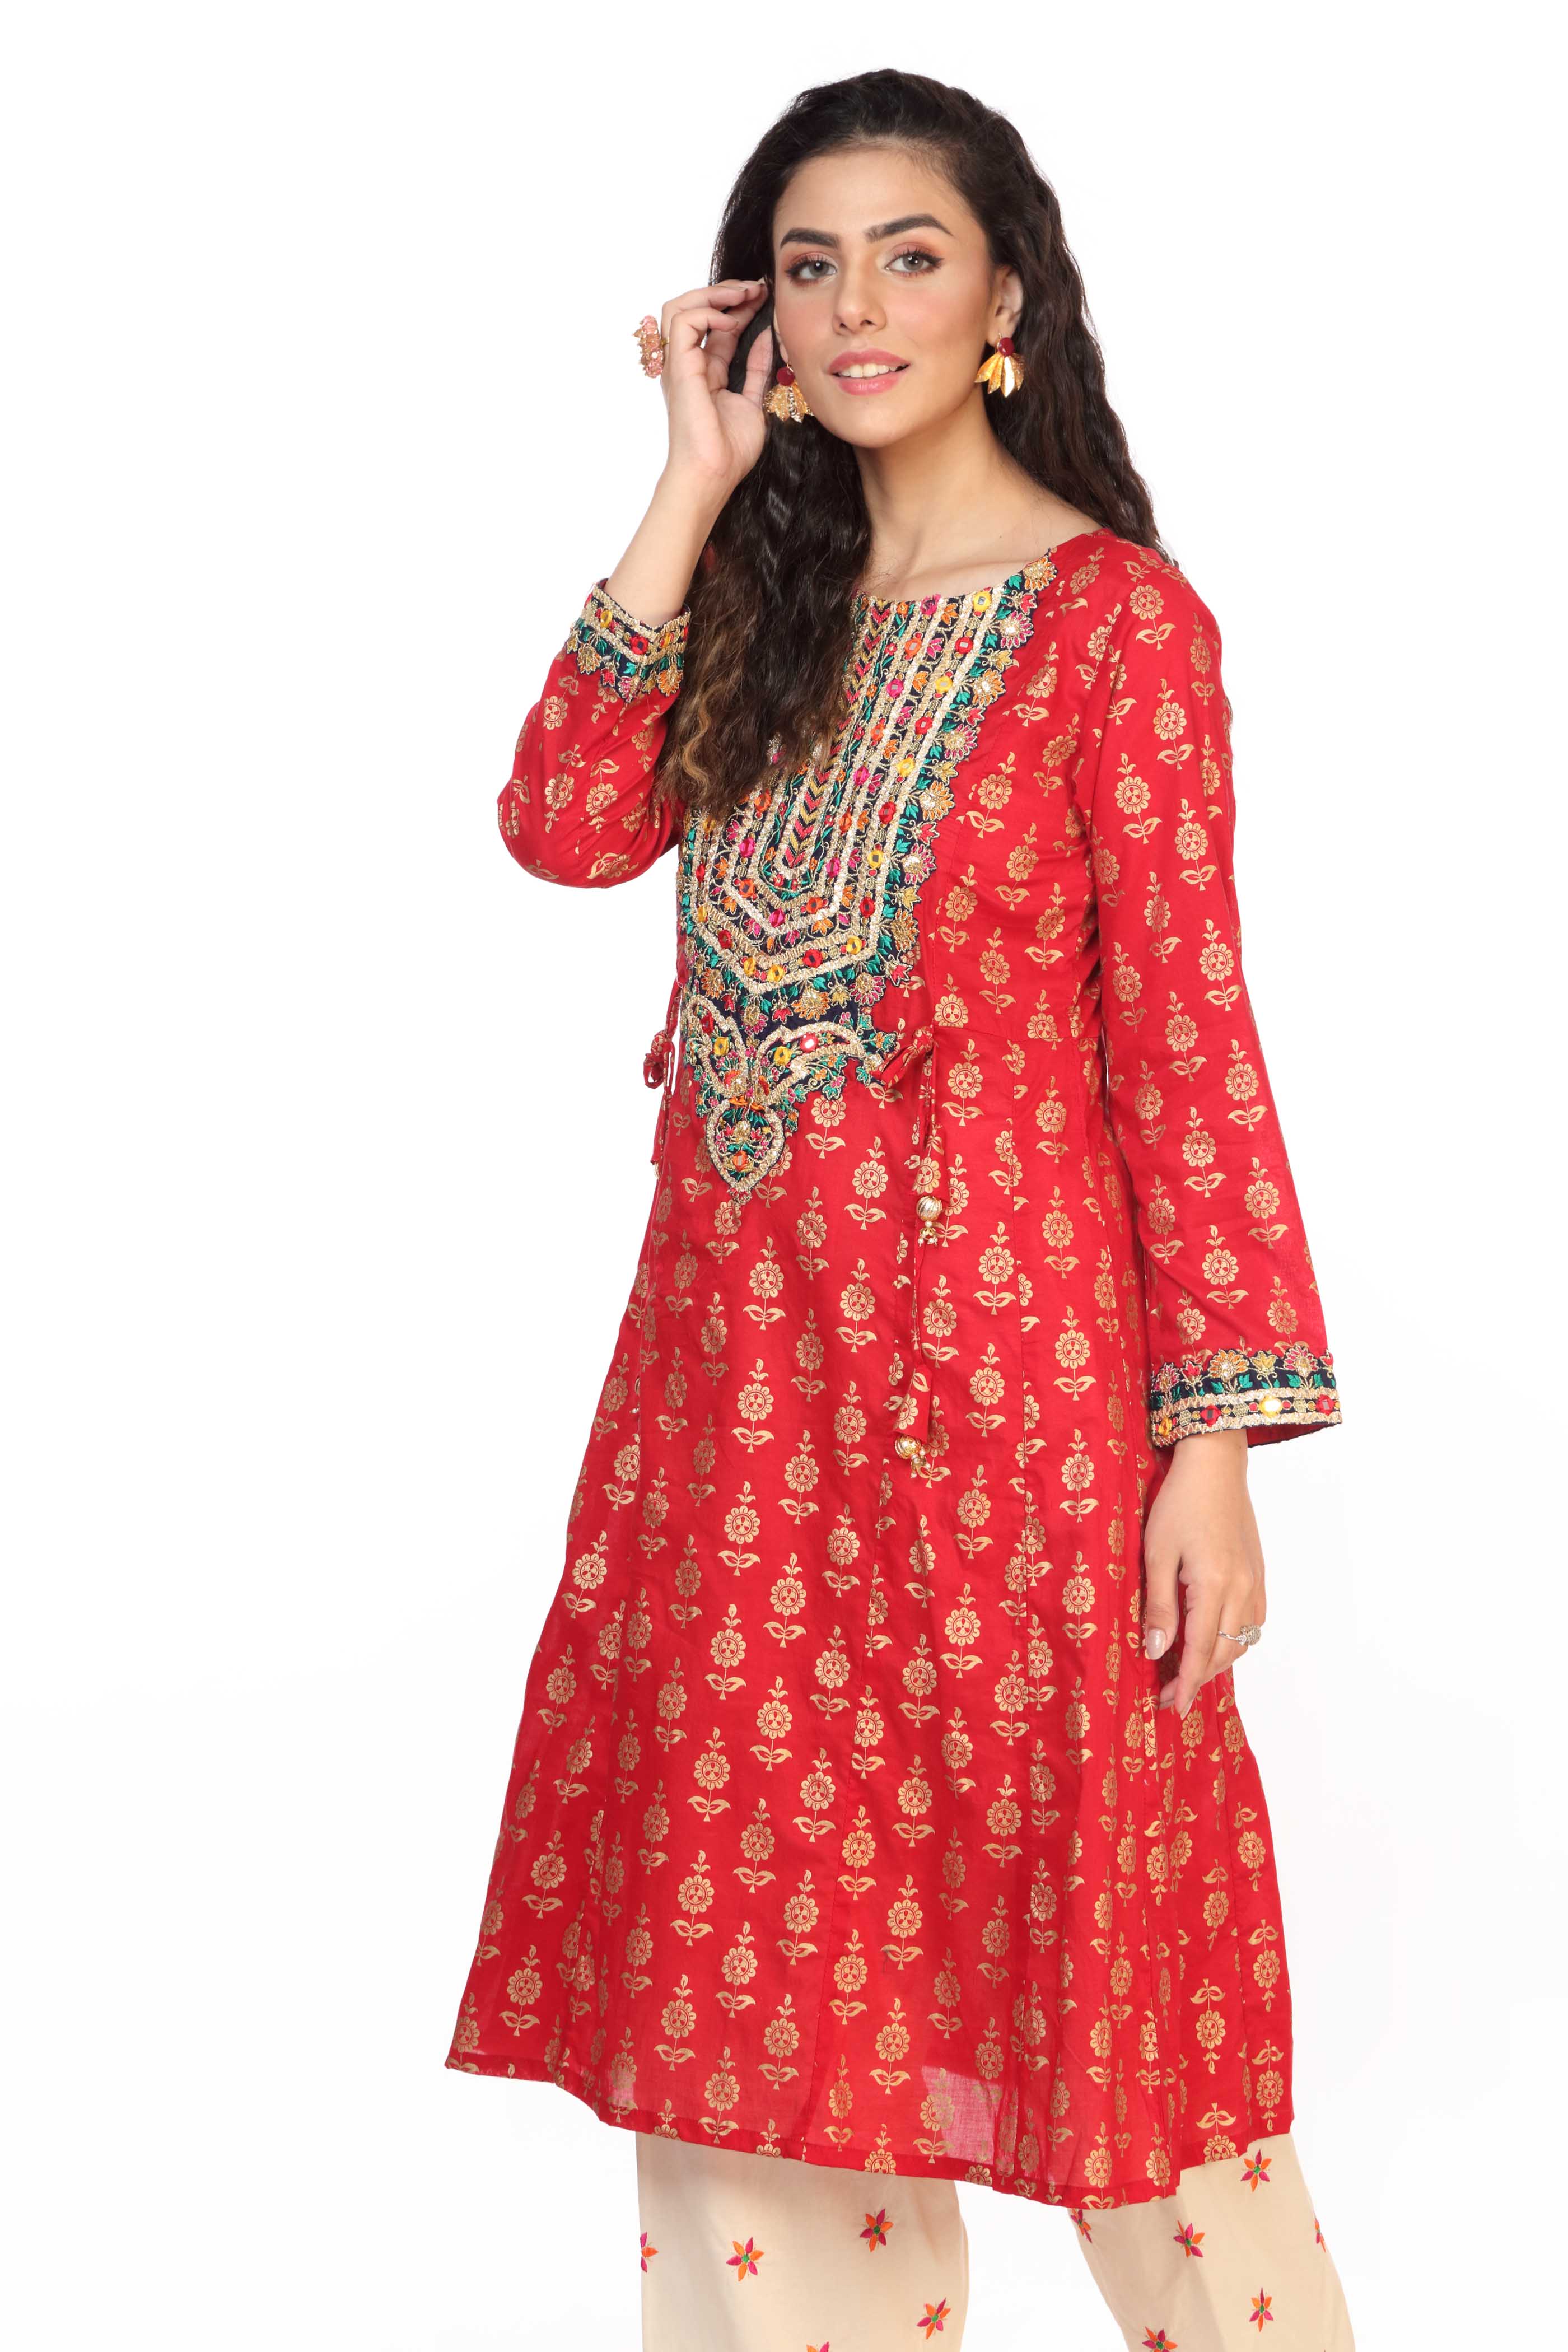 Blue Paisley 3 in Red coloured Printed Lawn fabric 2